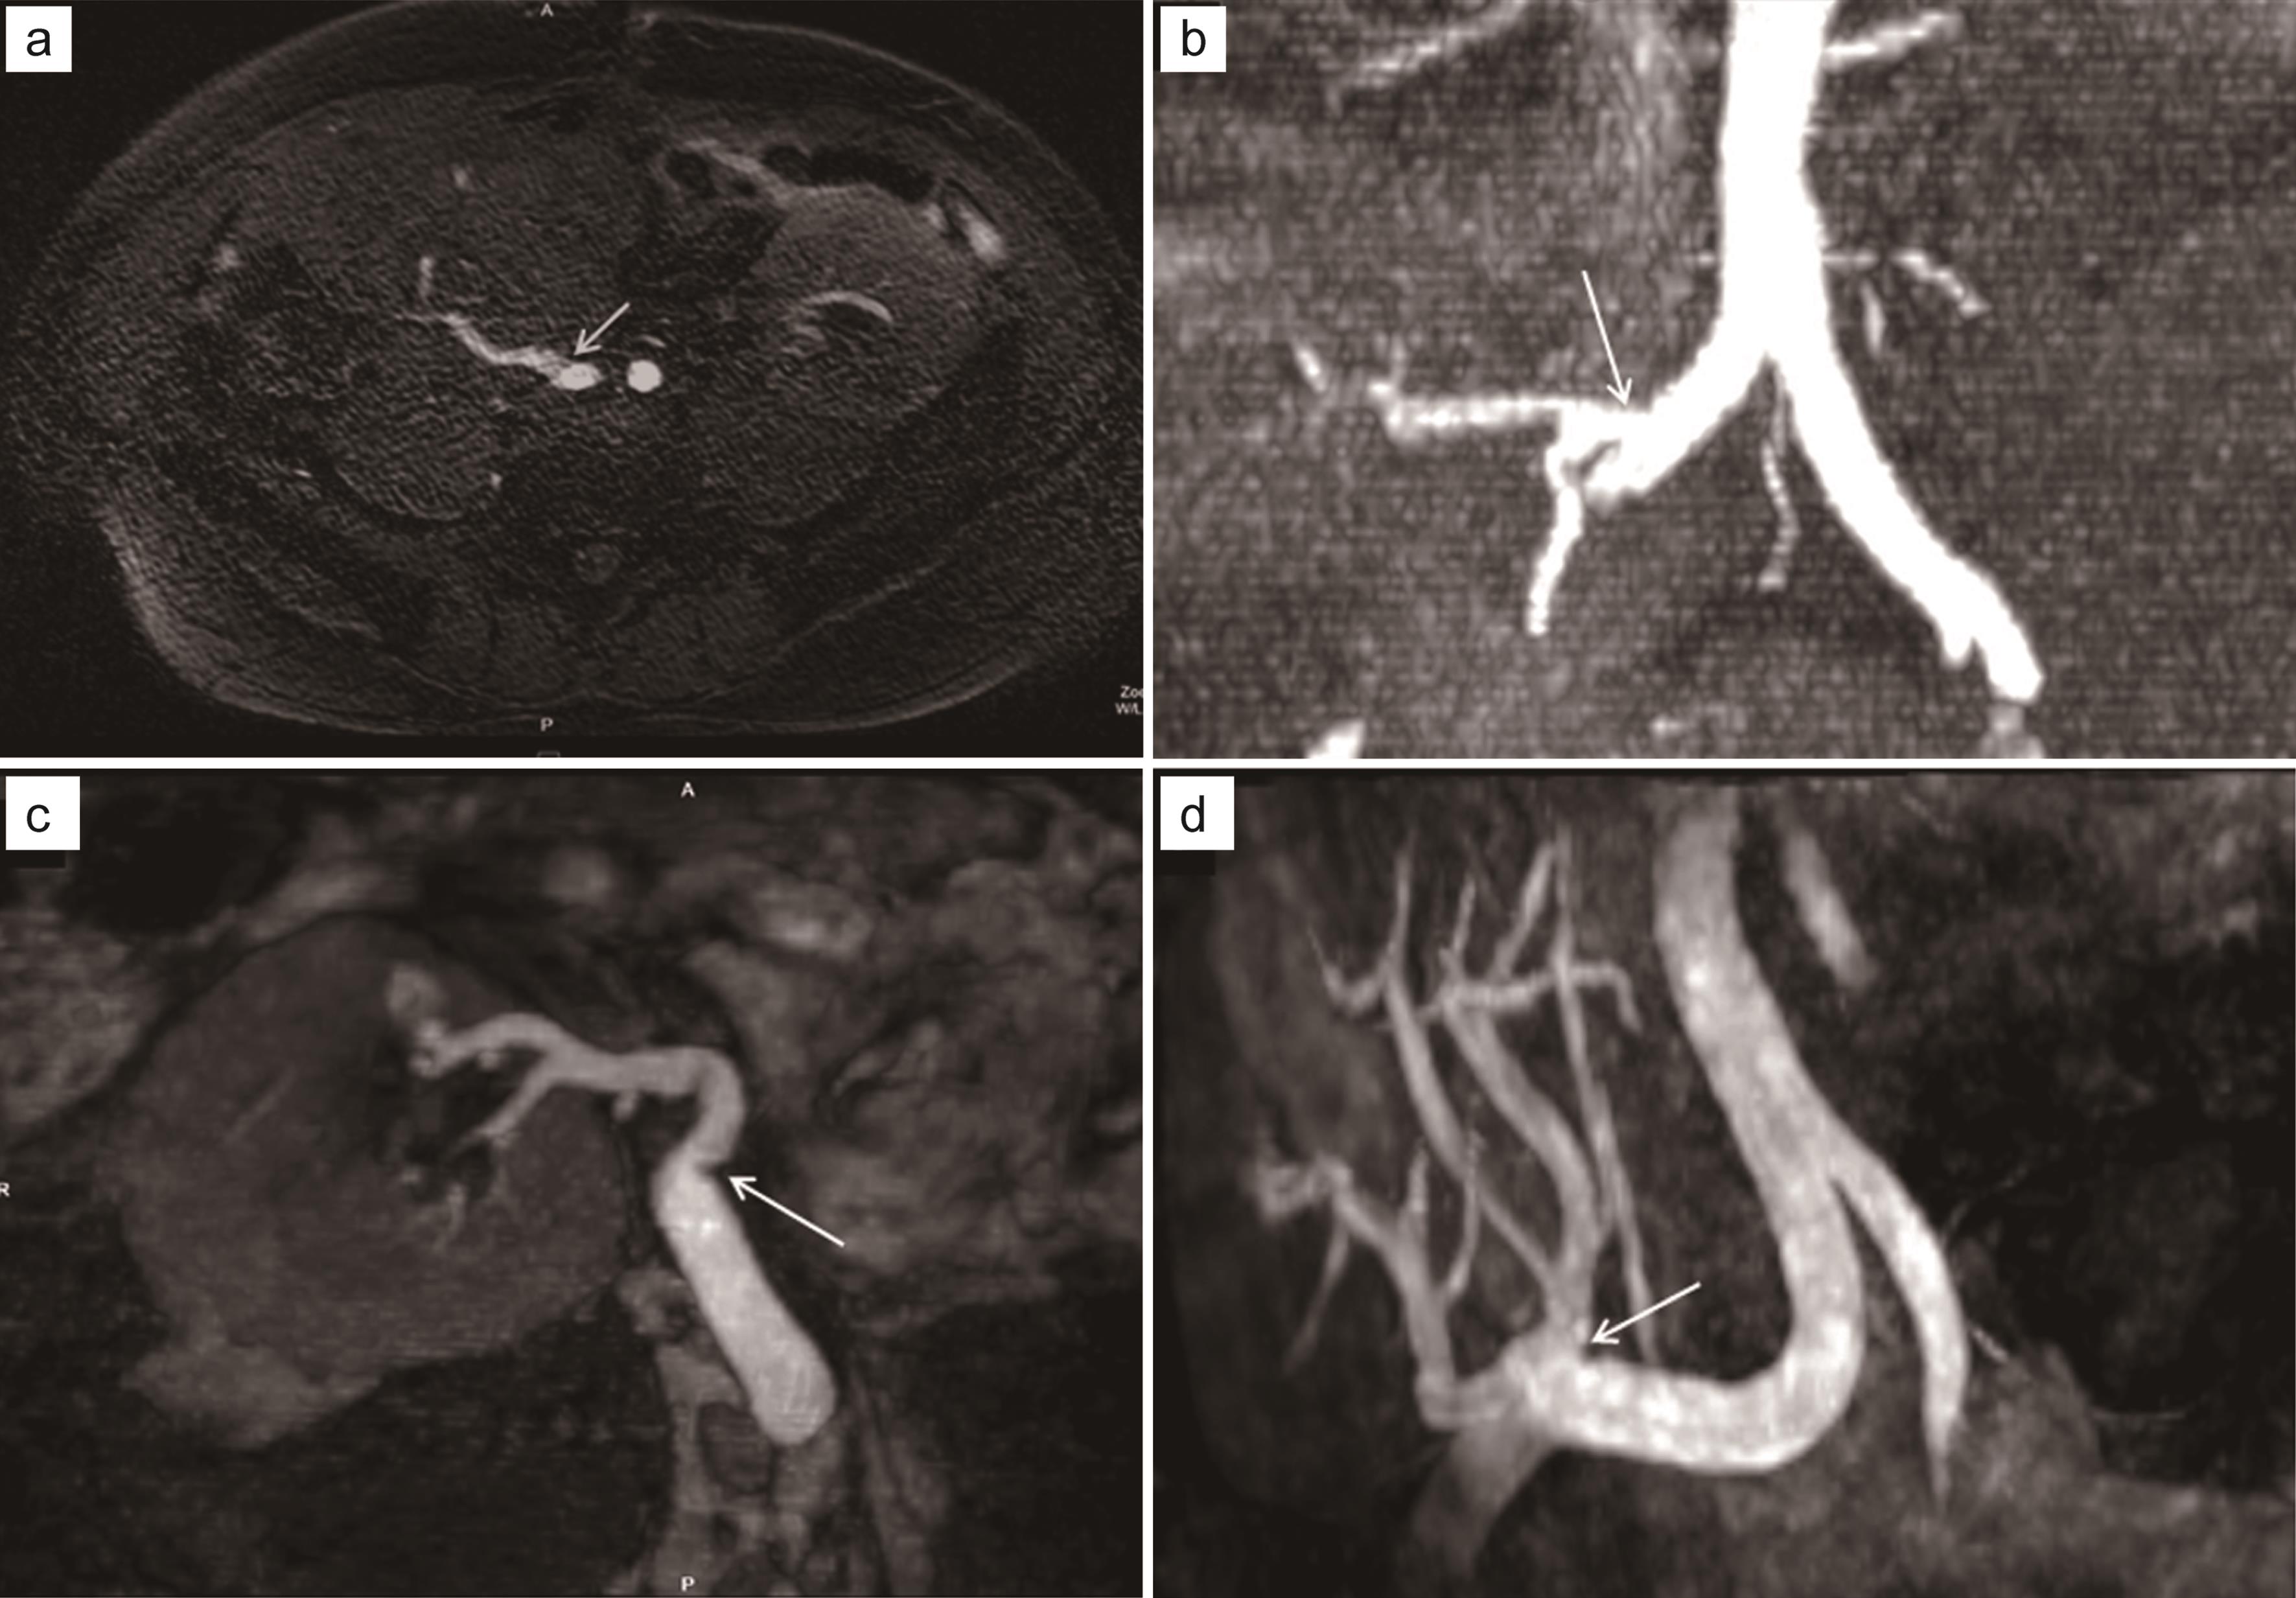 Normal QISS MRA and reformat in a 48-year-old male with a 1-year history of right lower quadrant kidney transplant that presented with mild renal dysfunction (GFR = 48) and abnormal Doppler ultrasound (a and b); Normal appearance of a 3D SSFP MRA reformat in a 60-year-old female with a 3-year history of right lower quadrant kidney transplant presented with renal dysfunction (GFR = 32) and abnormal Doppler ultrasound (c and d).